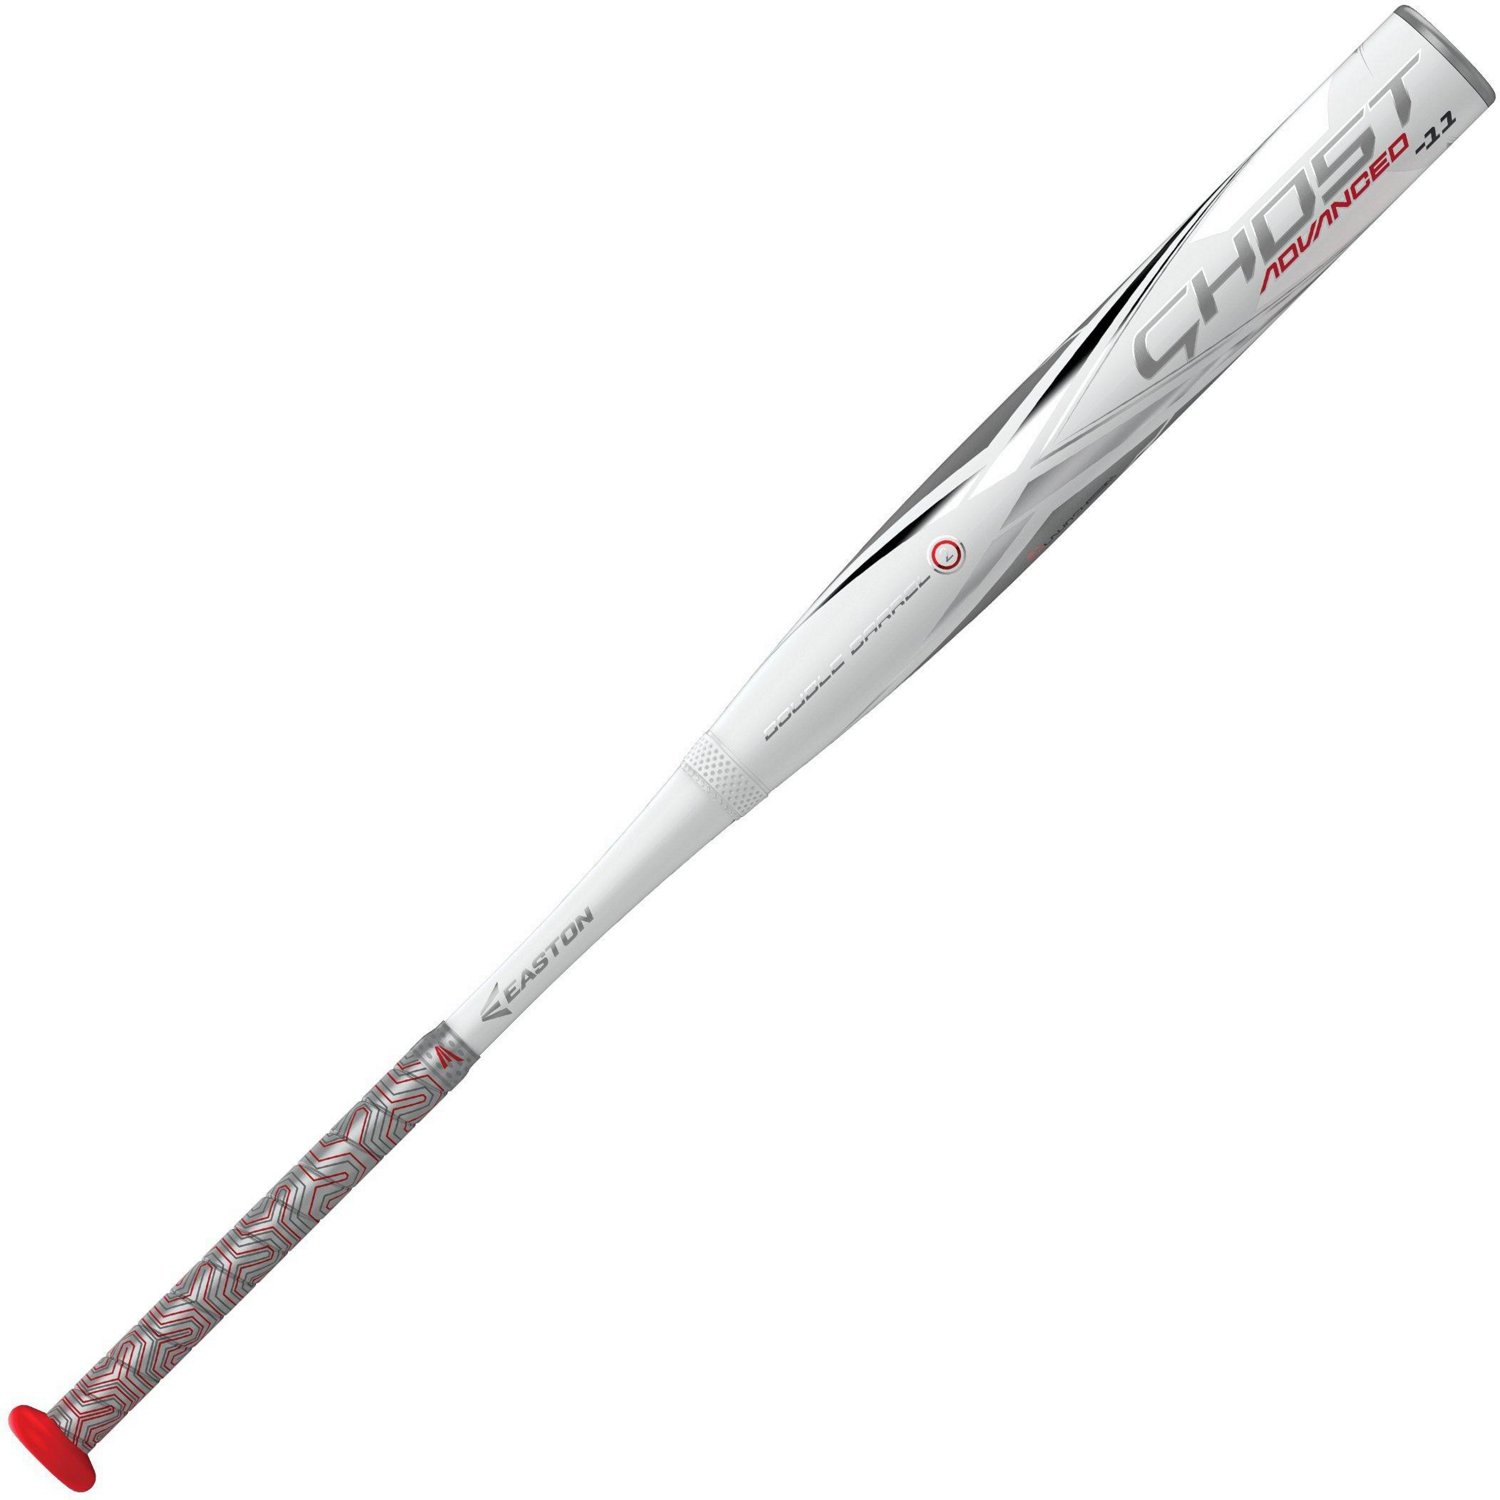 EASTON Adults' Ghost Advanced FastPitch Composite Softball Bat 11